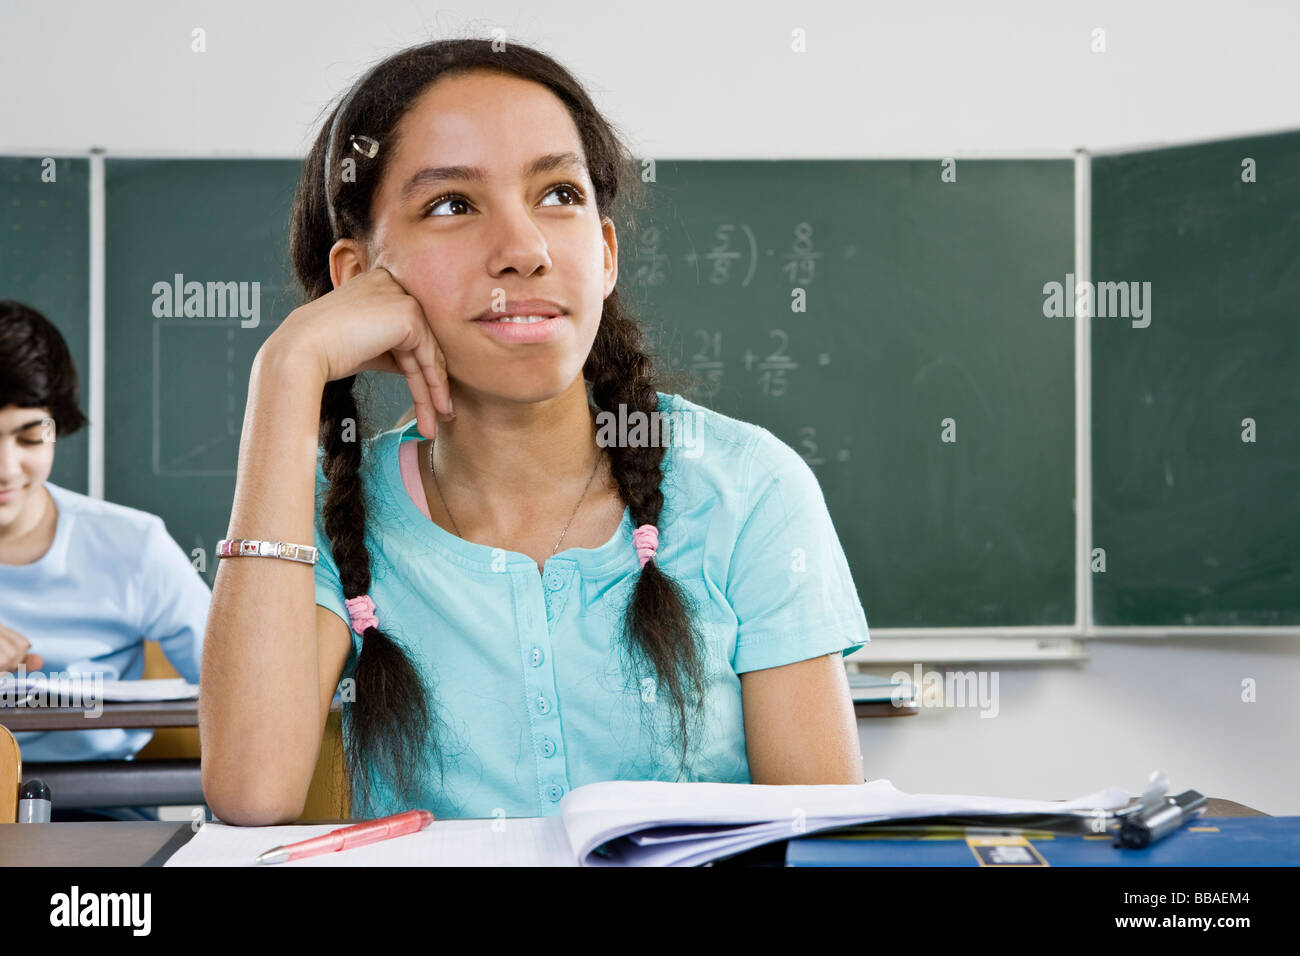 A schoolgirl sitting at a desk Stock Photo